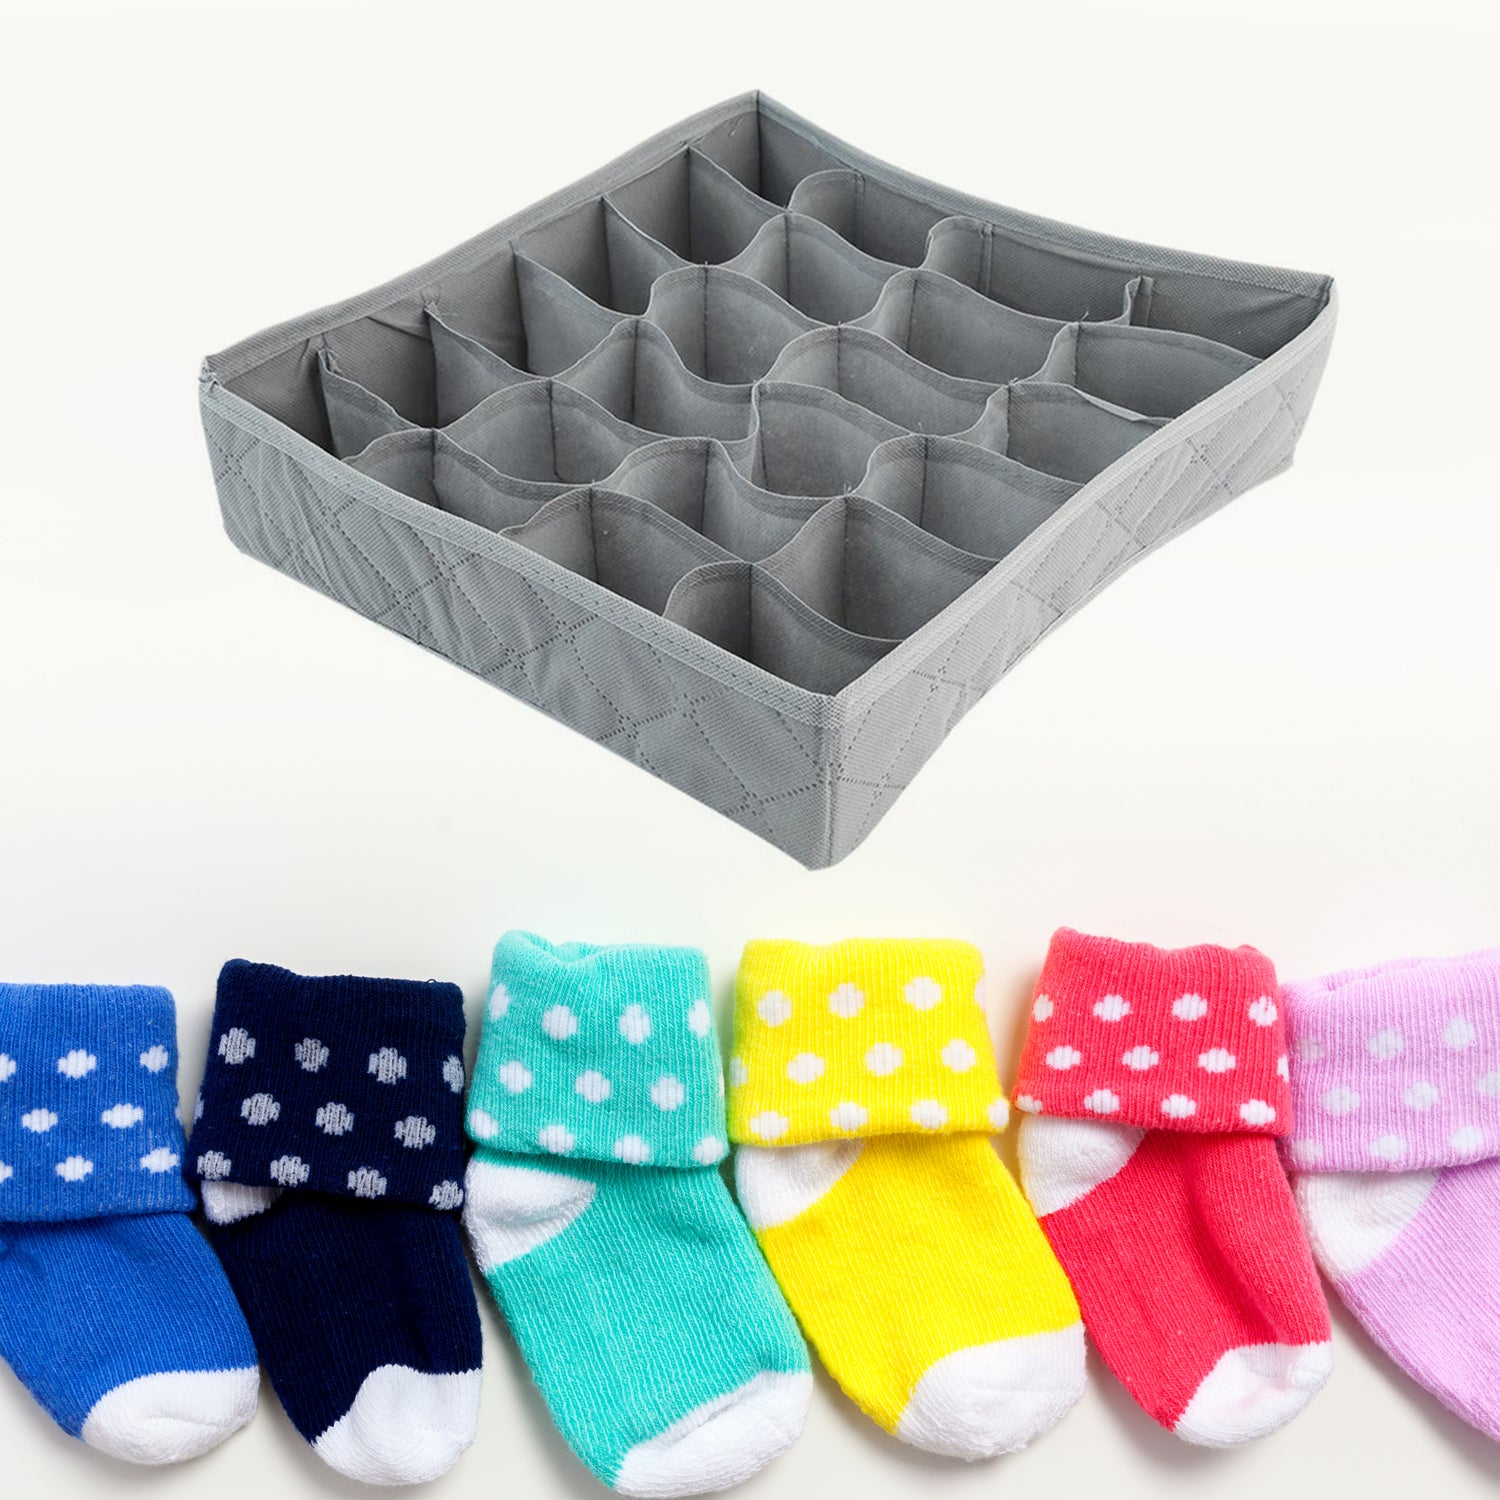 8417 Folding Removable Tie Necktie Sock,Handkerchiefs, Ties, Belts and Underwear Storage Boxes, Easy Assemble Lightweight Folding for Home Daily Use (1 Pc Mix Design)